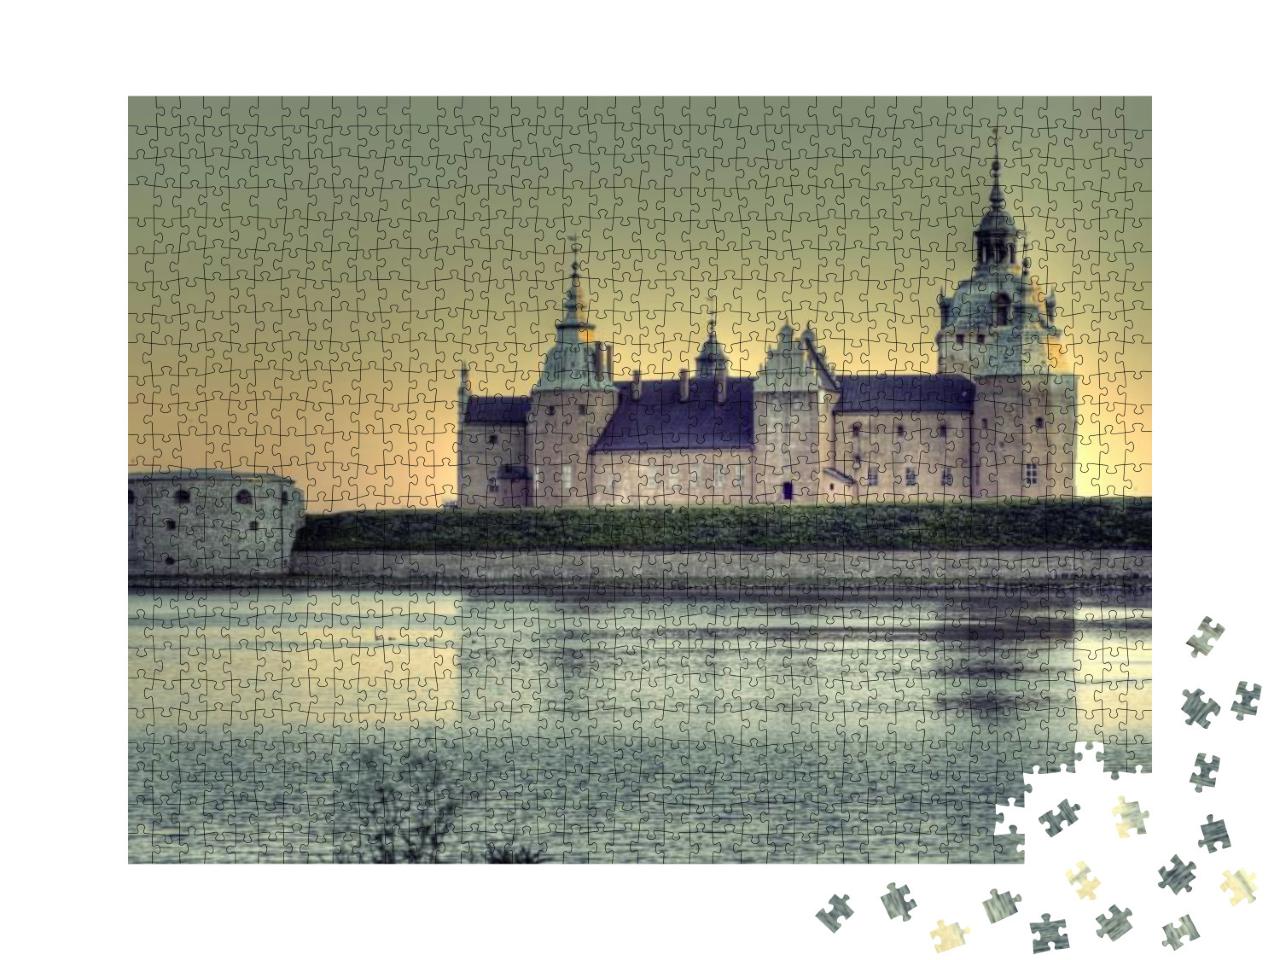 Her Photo of Kalmar Castle in Evening Light... Jigsaw Puzzle with 1000 pieces